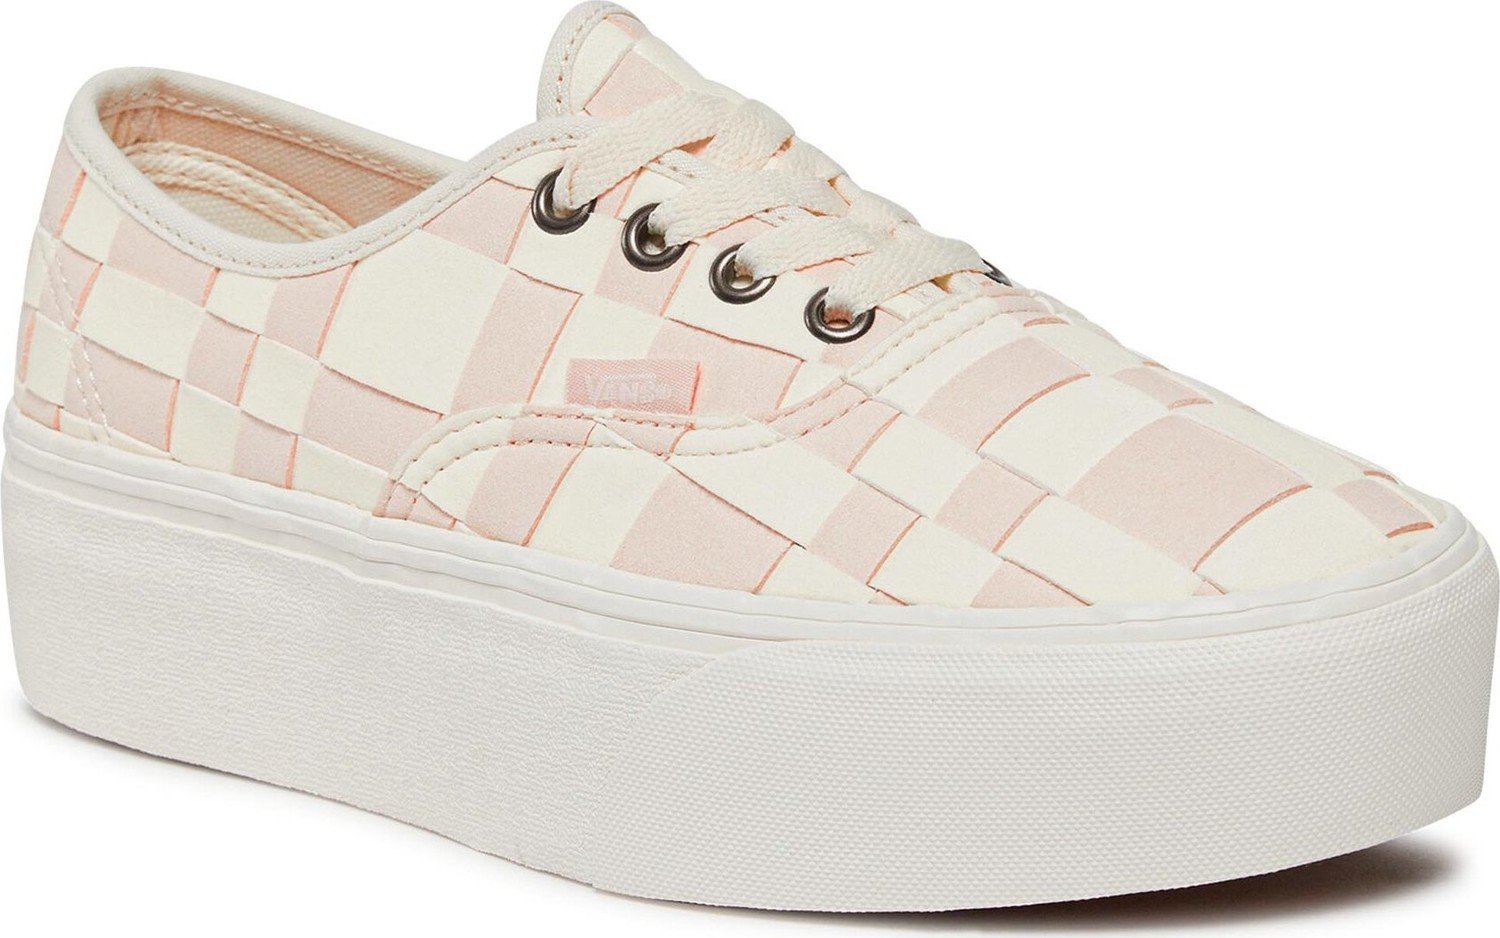 Tenisky Vans Authentic Stackform VN0A5KXXYL71 White/Pink